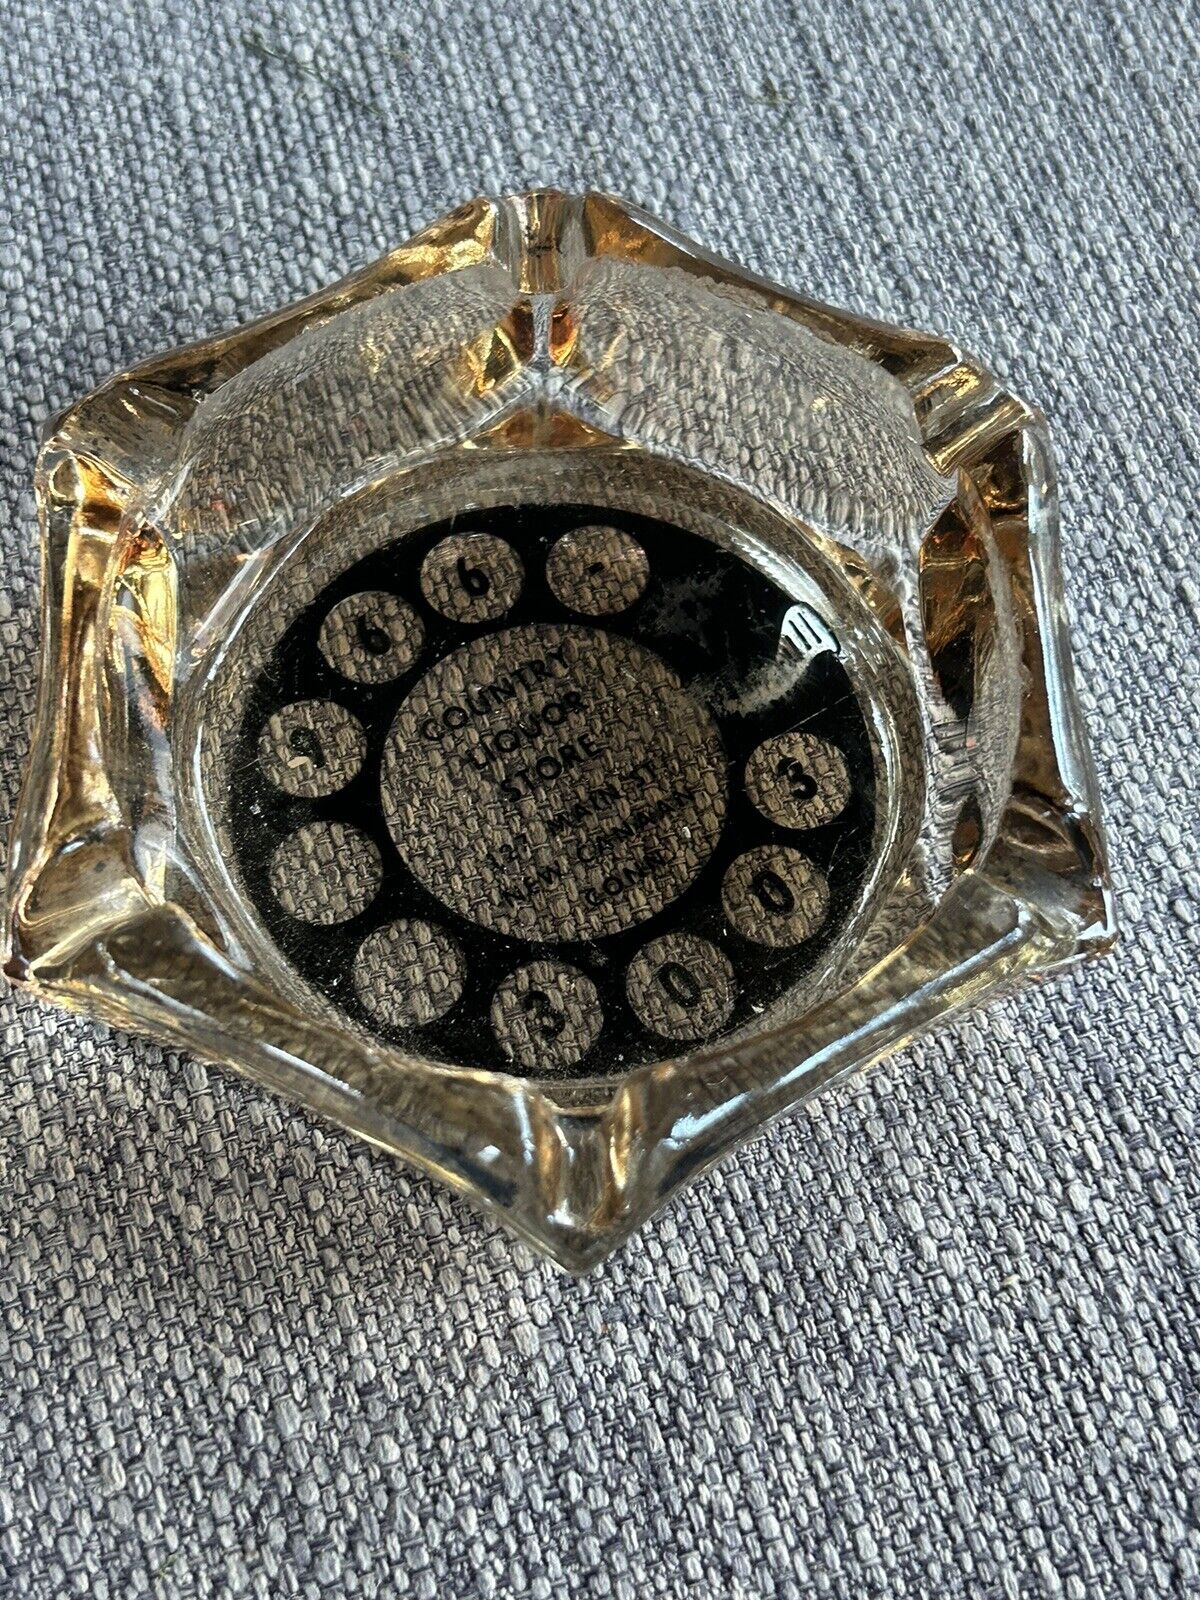 Vintage Glass ashtray Phone Dial  “Country Liquor  Store”